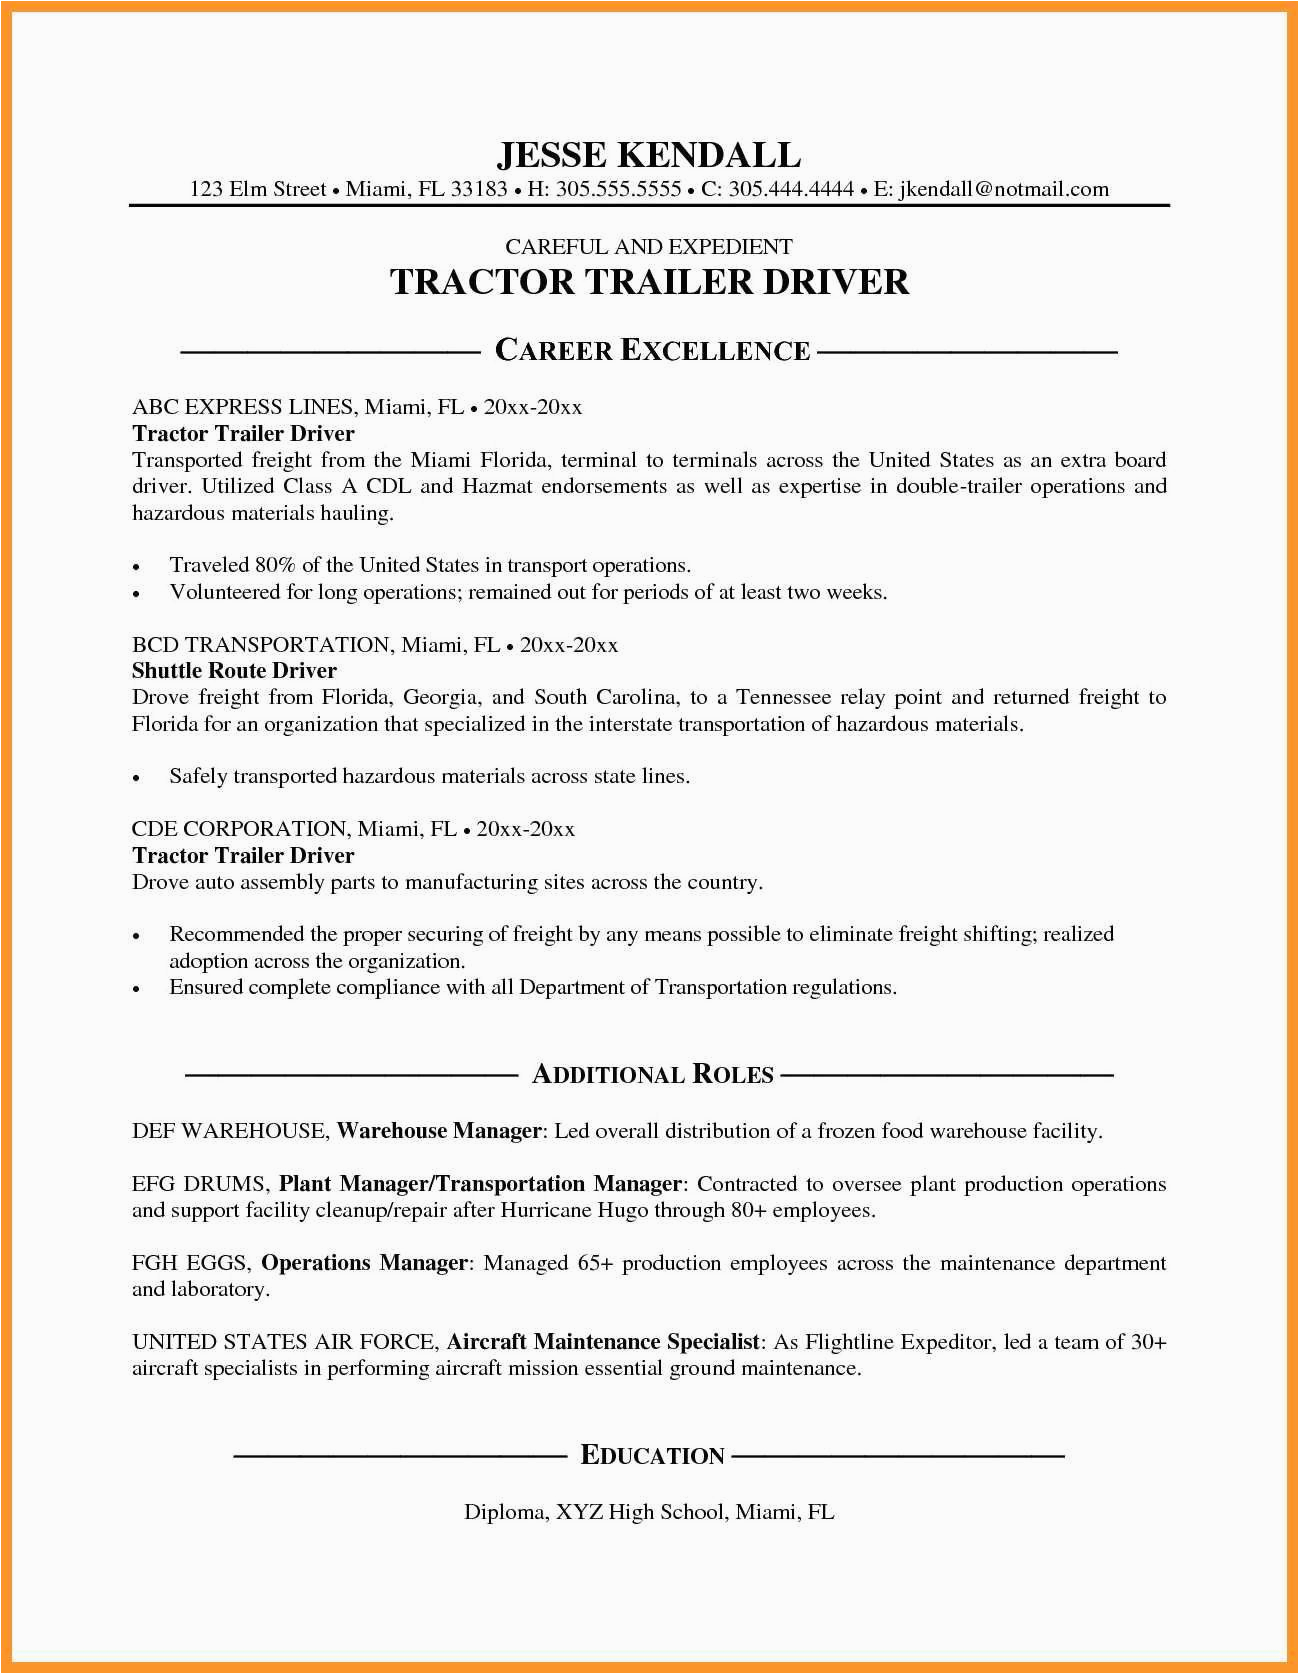 Sample Resume for Truck Driver with No Experience Truck Driver Resume No Experience Lovely 12 13 Cdl Class A